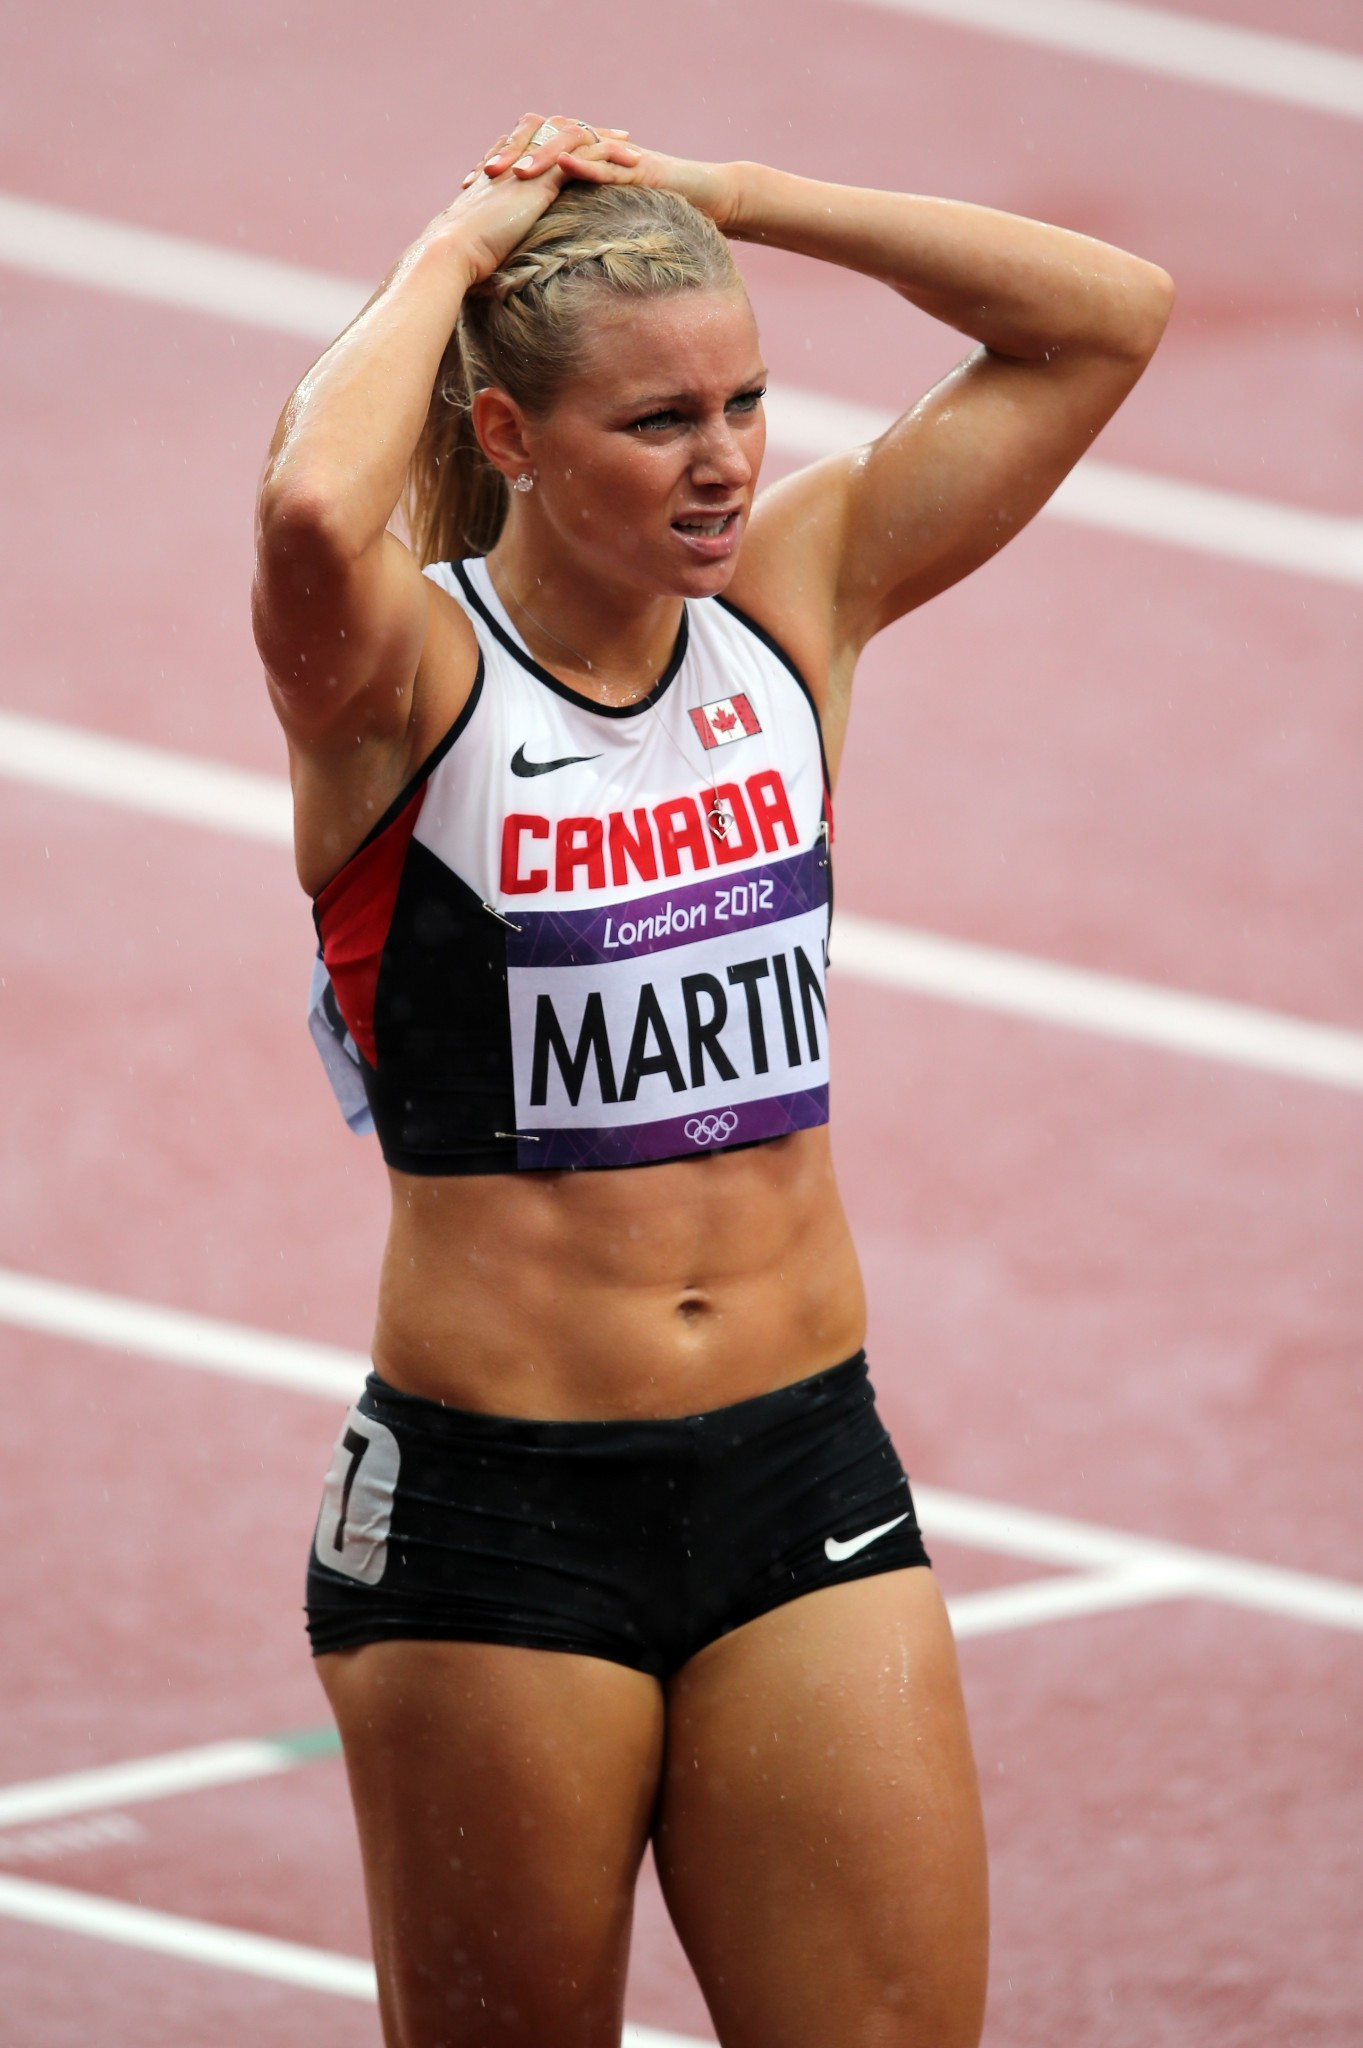 Canada's Jenna Martin-Evans made the semi-finals of the 400m at London 2012 ©Getty Images